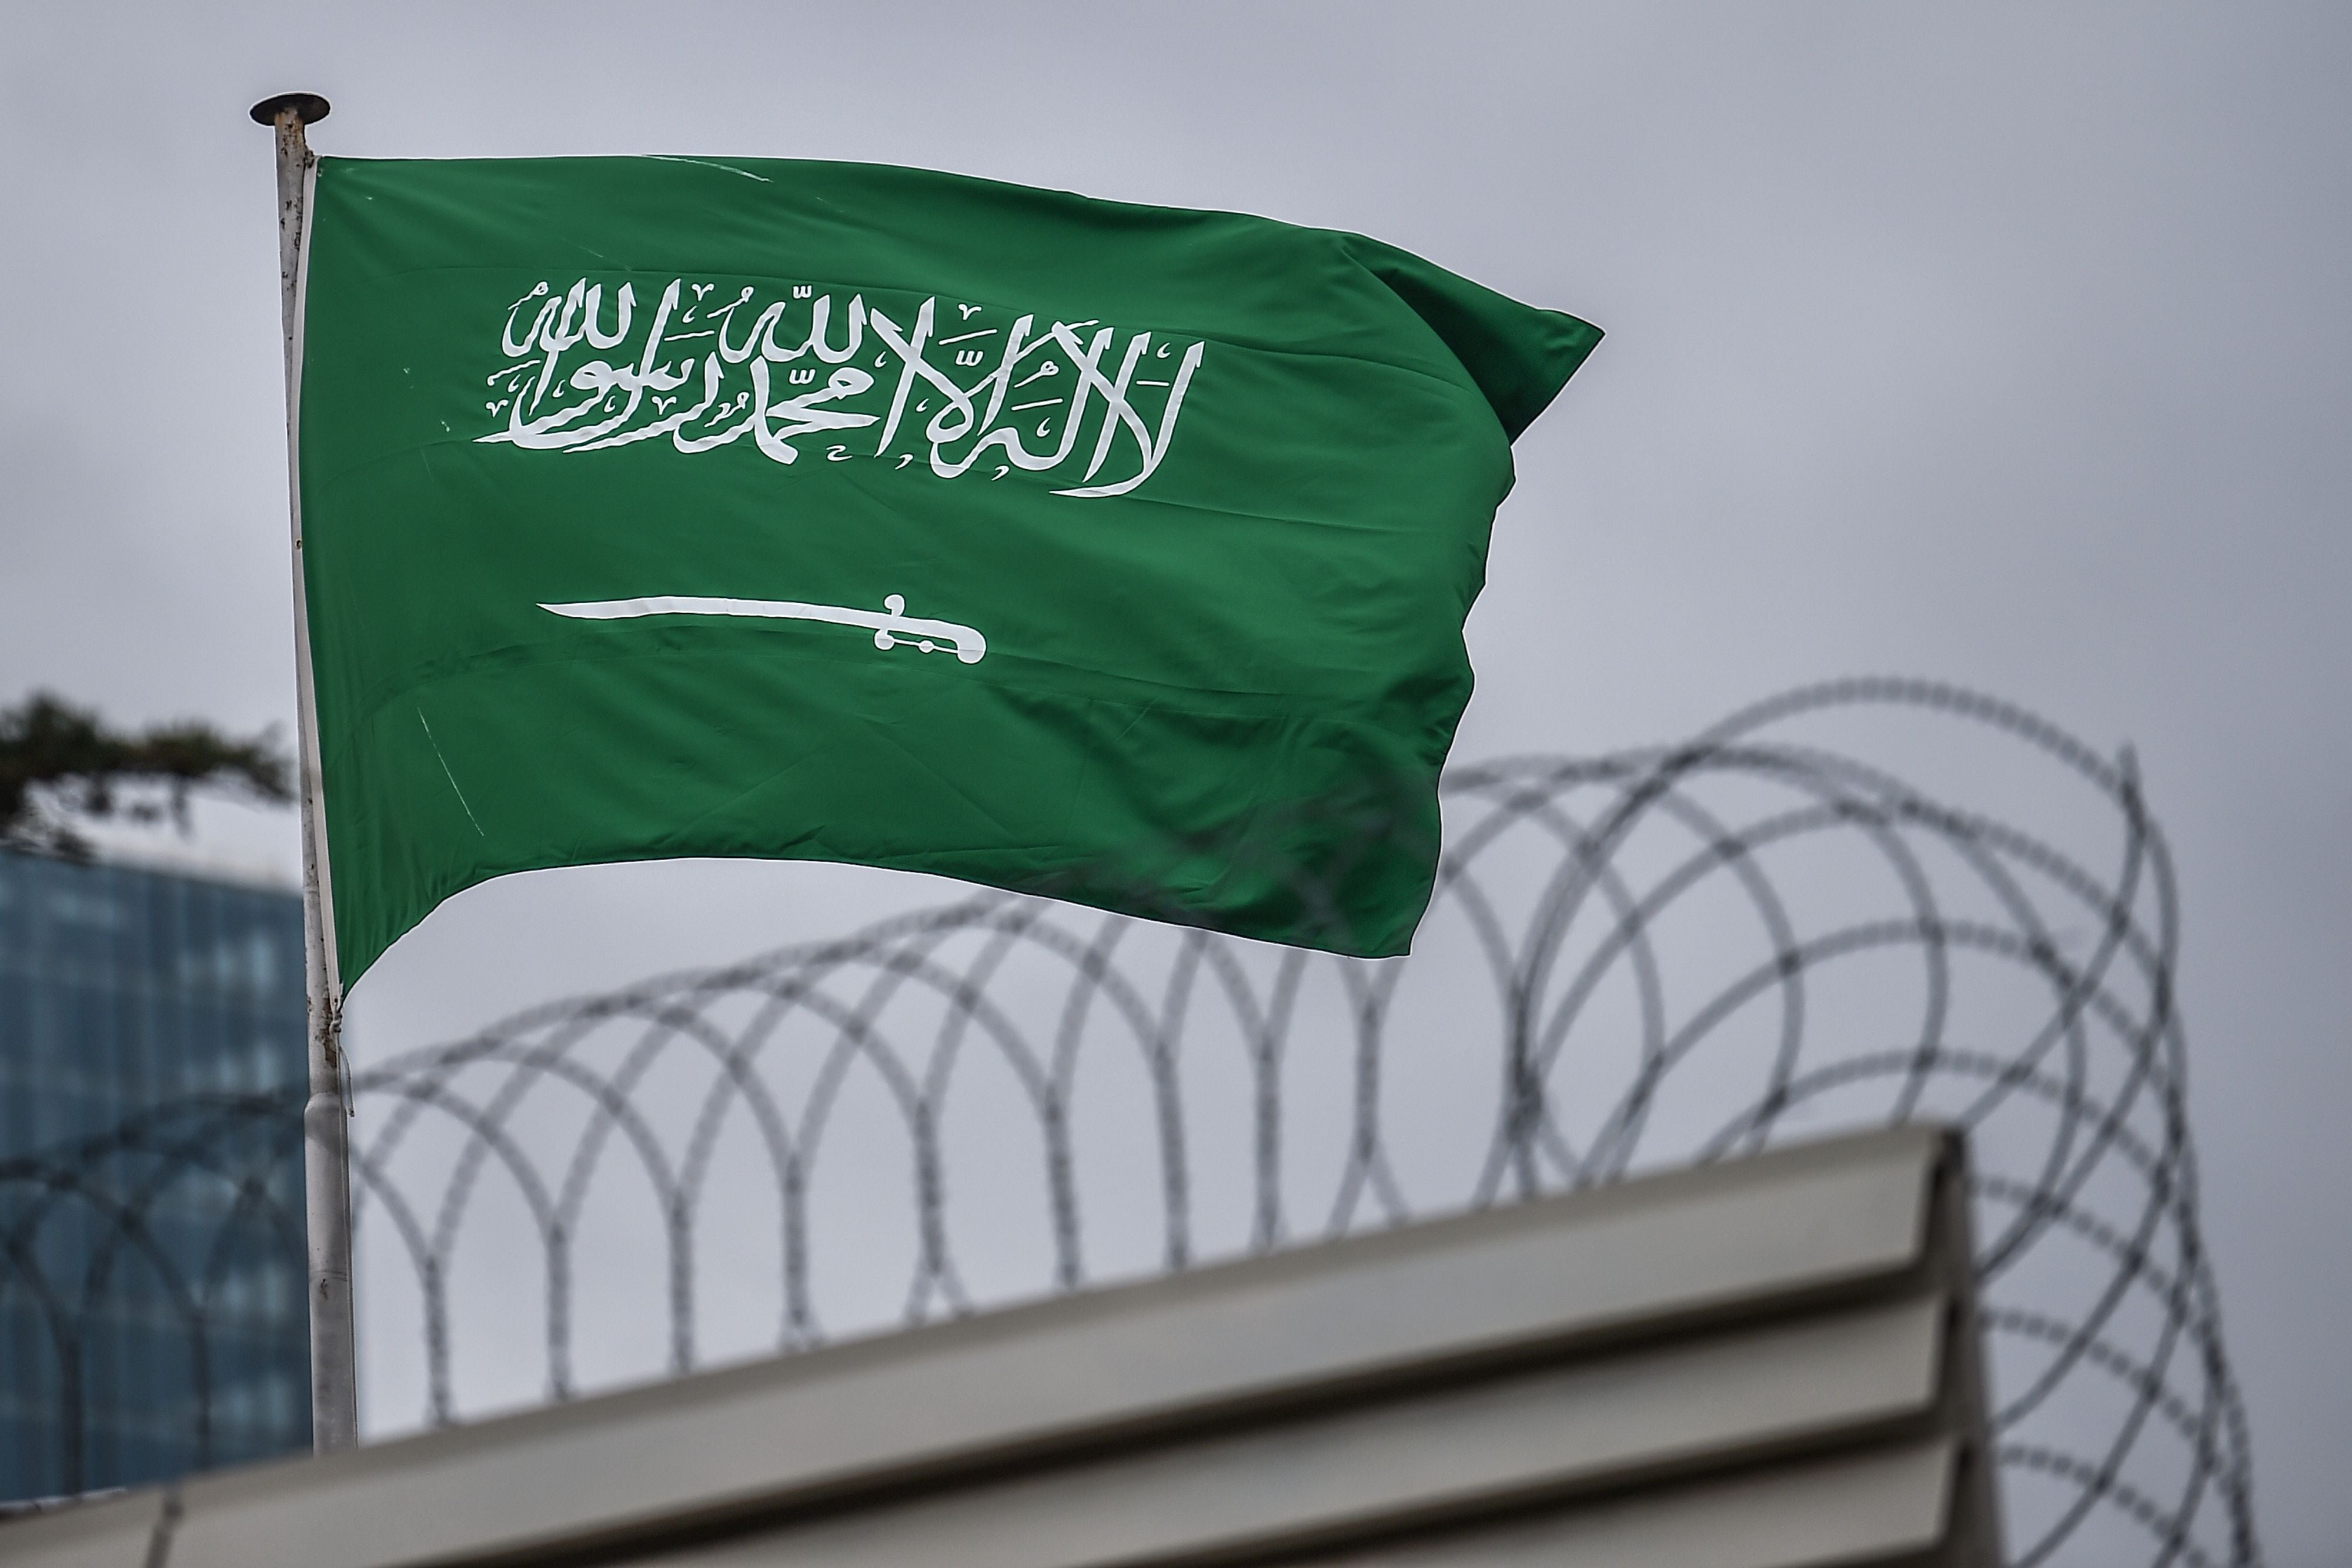 Saudi Arabia is among countries with a poor human rights record